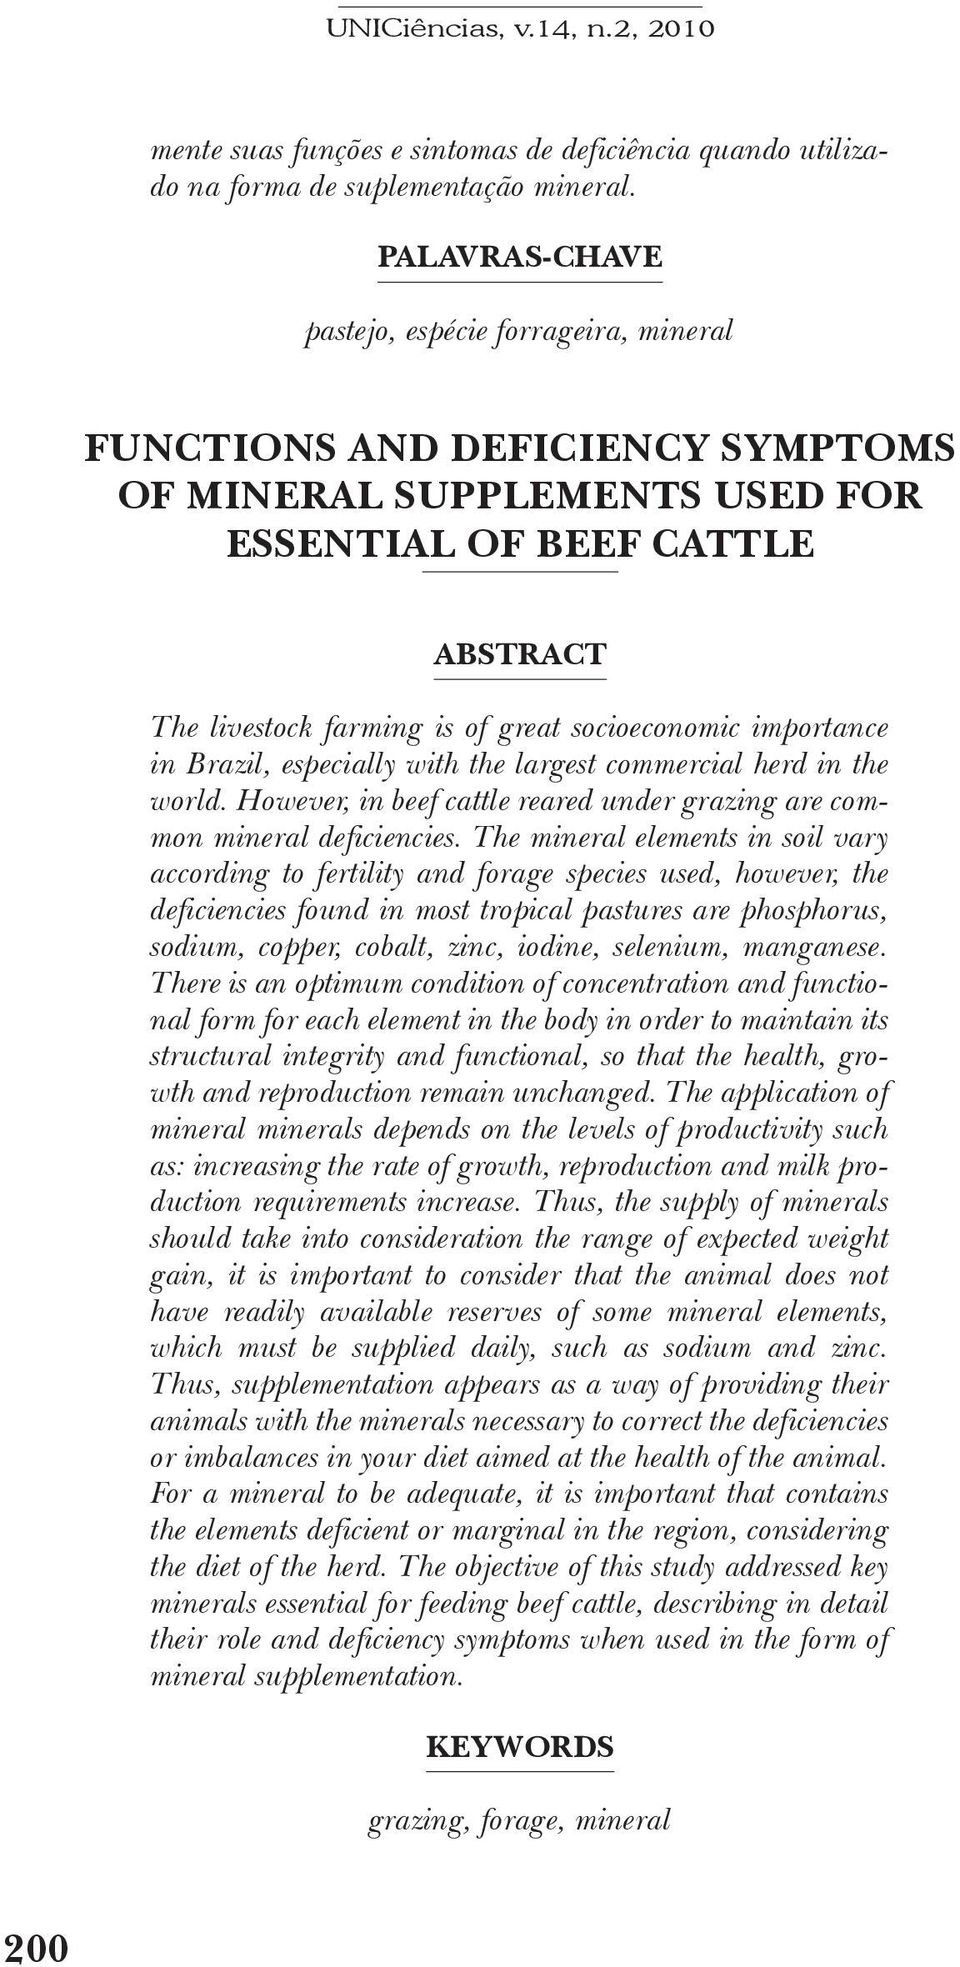 importance in Brazil, especially with the largest commercial herd in the world. However, in beef cattle reared under grazing are common mineral deficiencies.